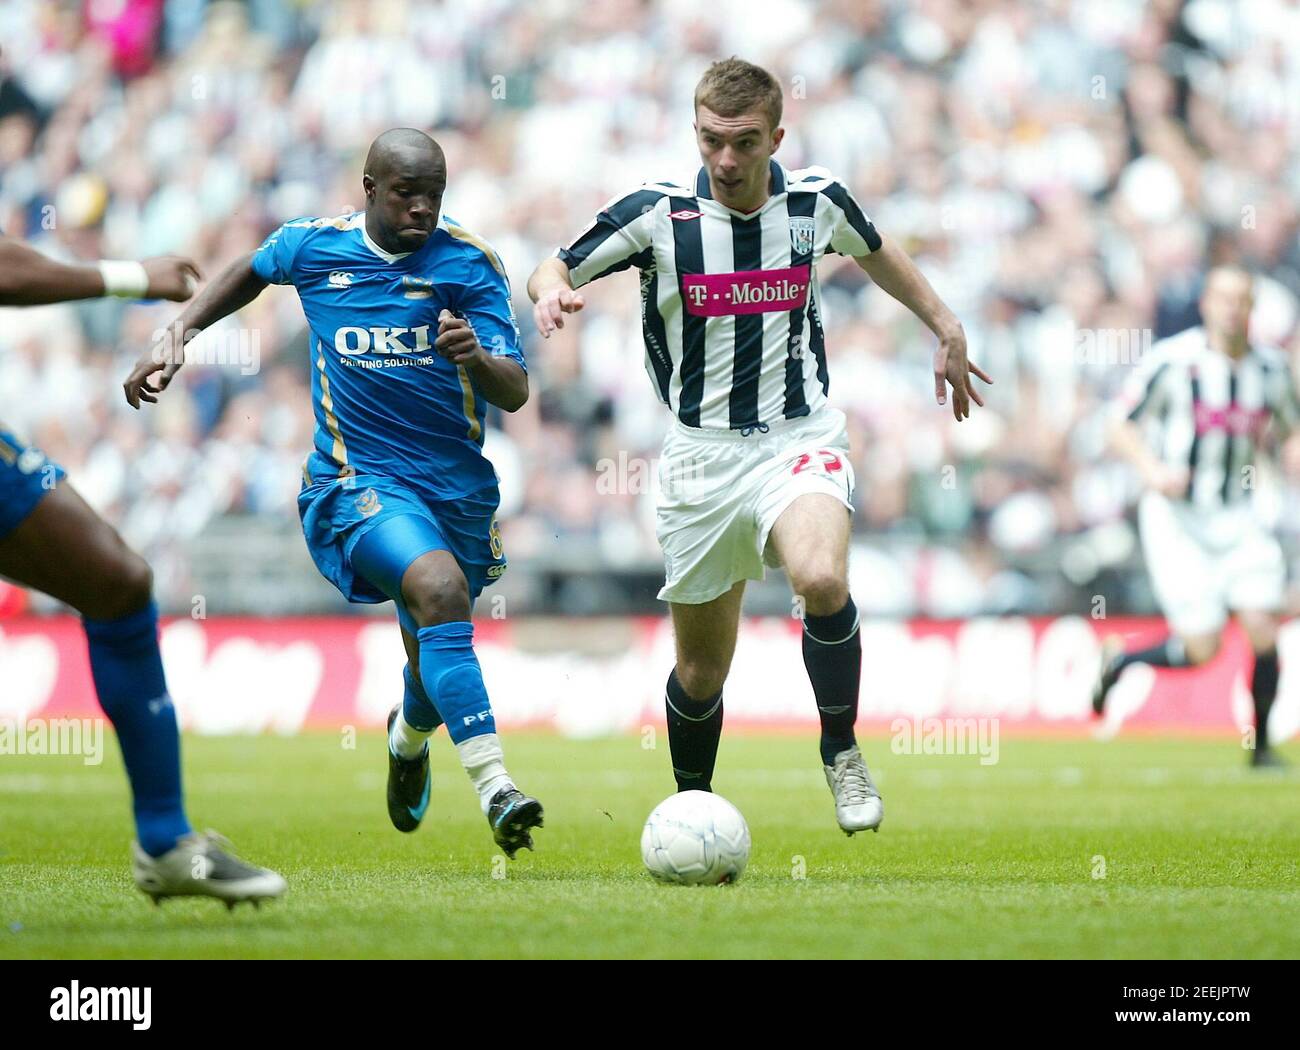 Football - Portsmouth v West Bromwich Albion - FA Cup Semi Final - Wembley Stadium - 07/08 - 5/4/08  Portsmouth's Lassana Diarra in action against West Bromwich Albion's James Morrison (R)  Mandatory Credit: Action Images / Peter Cziborra Stock Photo